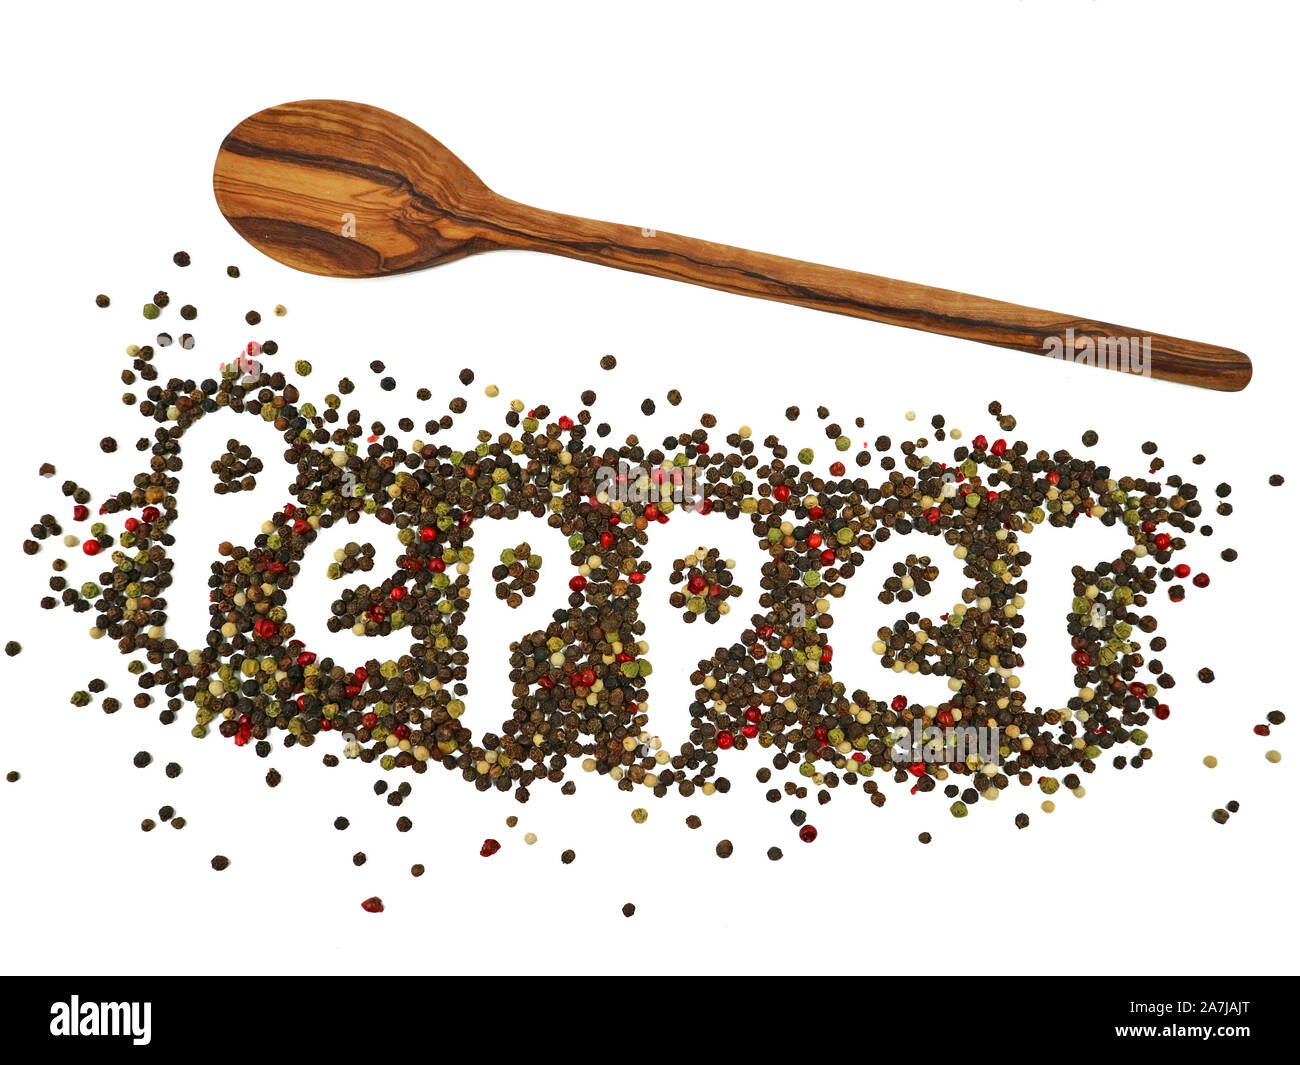 Mixed colored dried peppercorns with wooden spoon isolated on white background show the word ,,Pepper,, Stock Photo